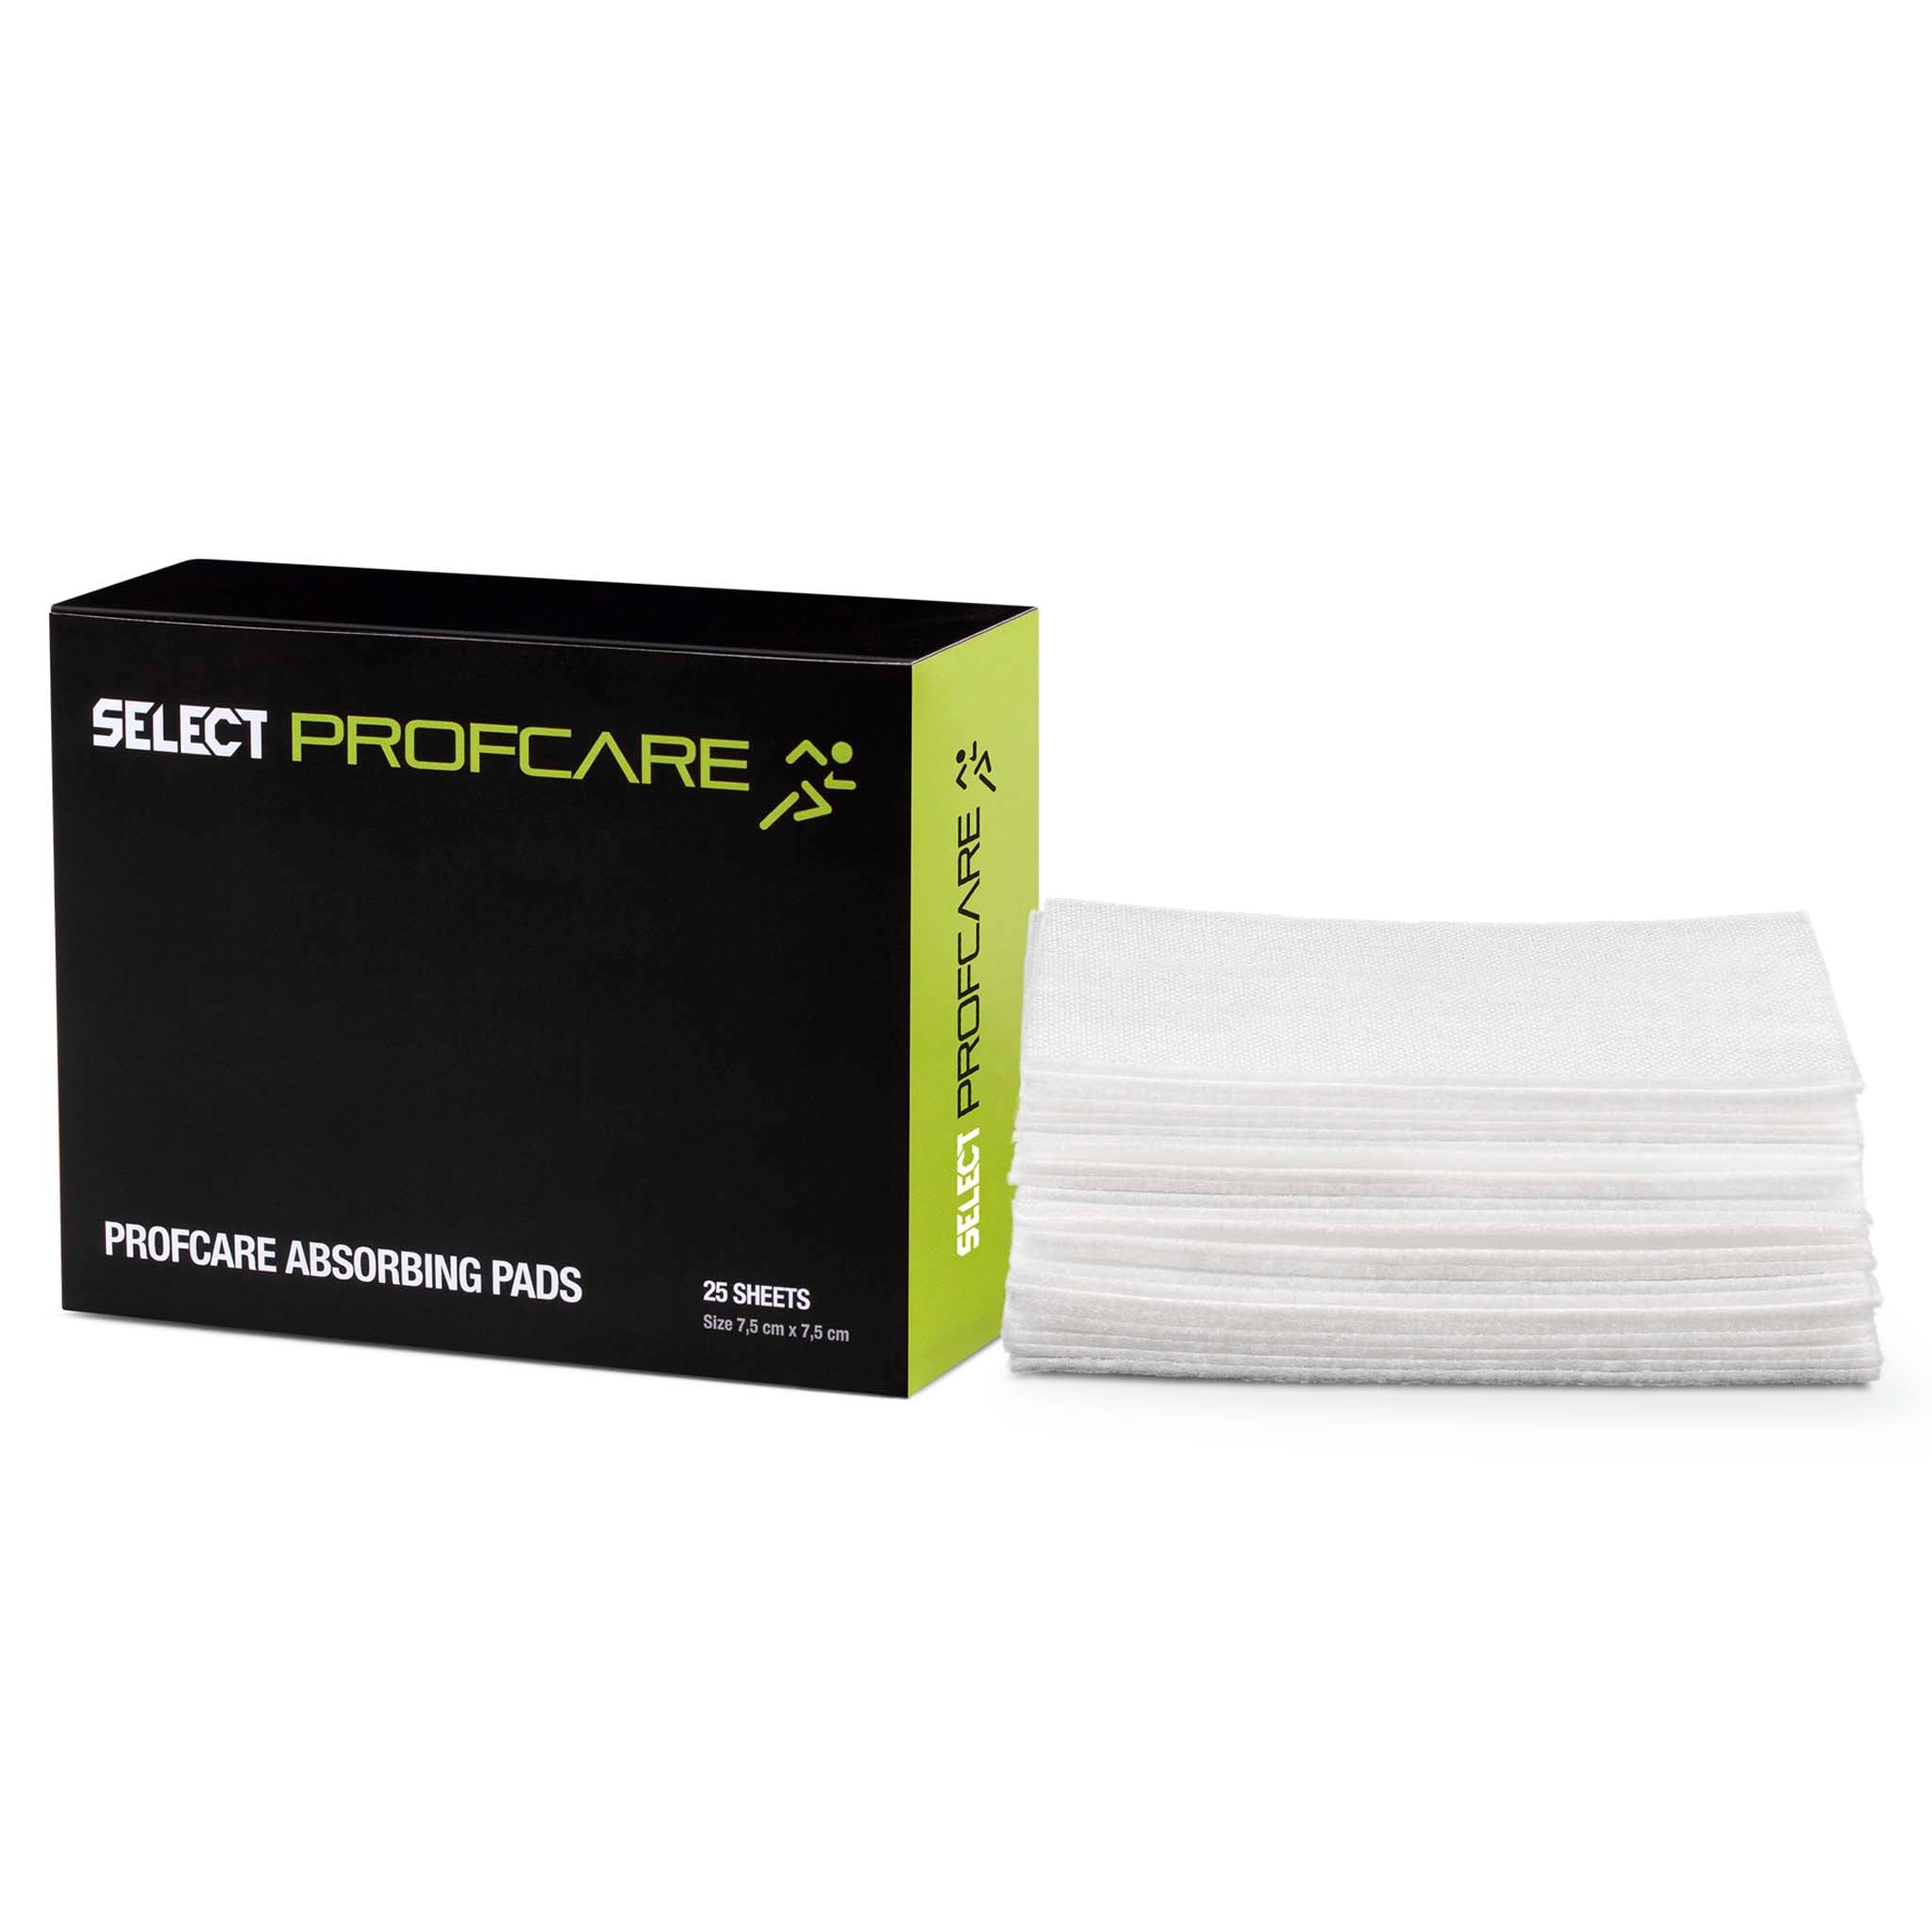 Profcare Absorbing Pads